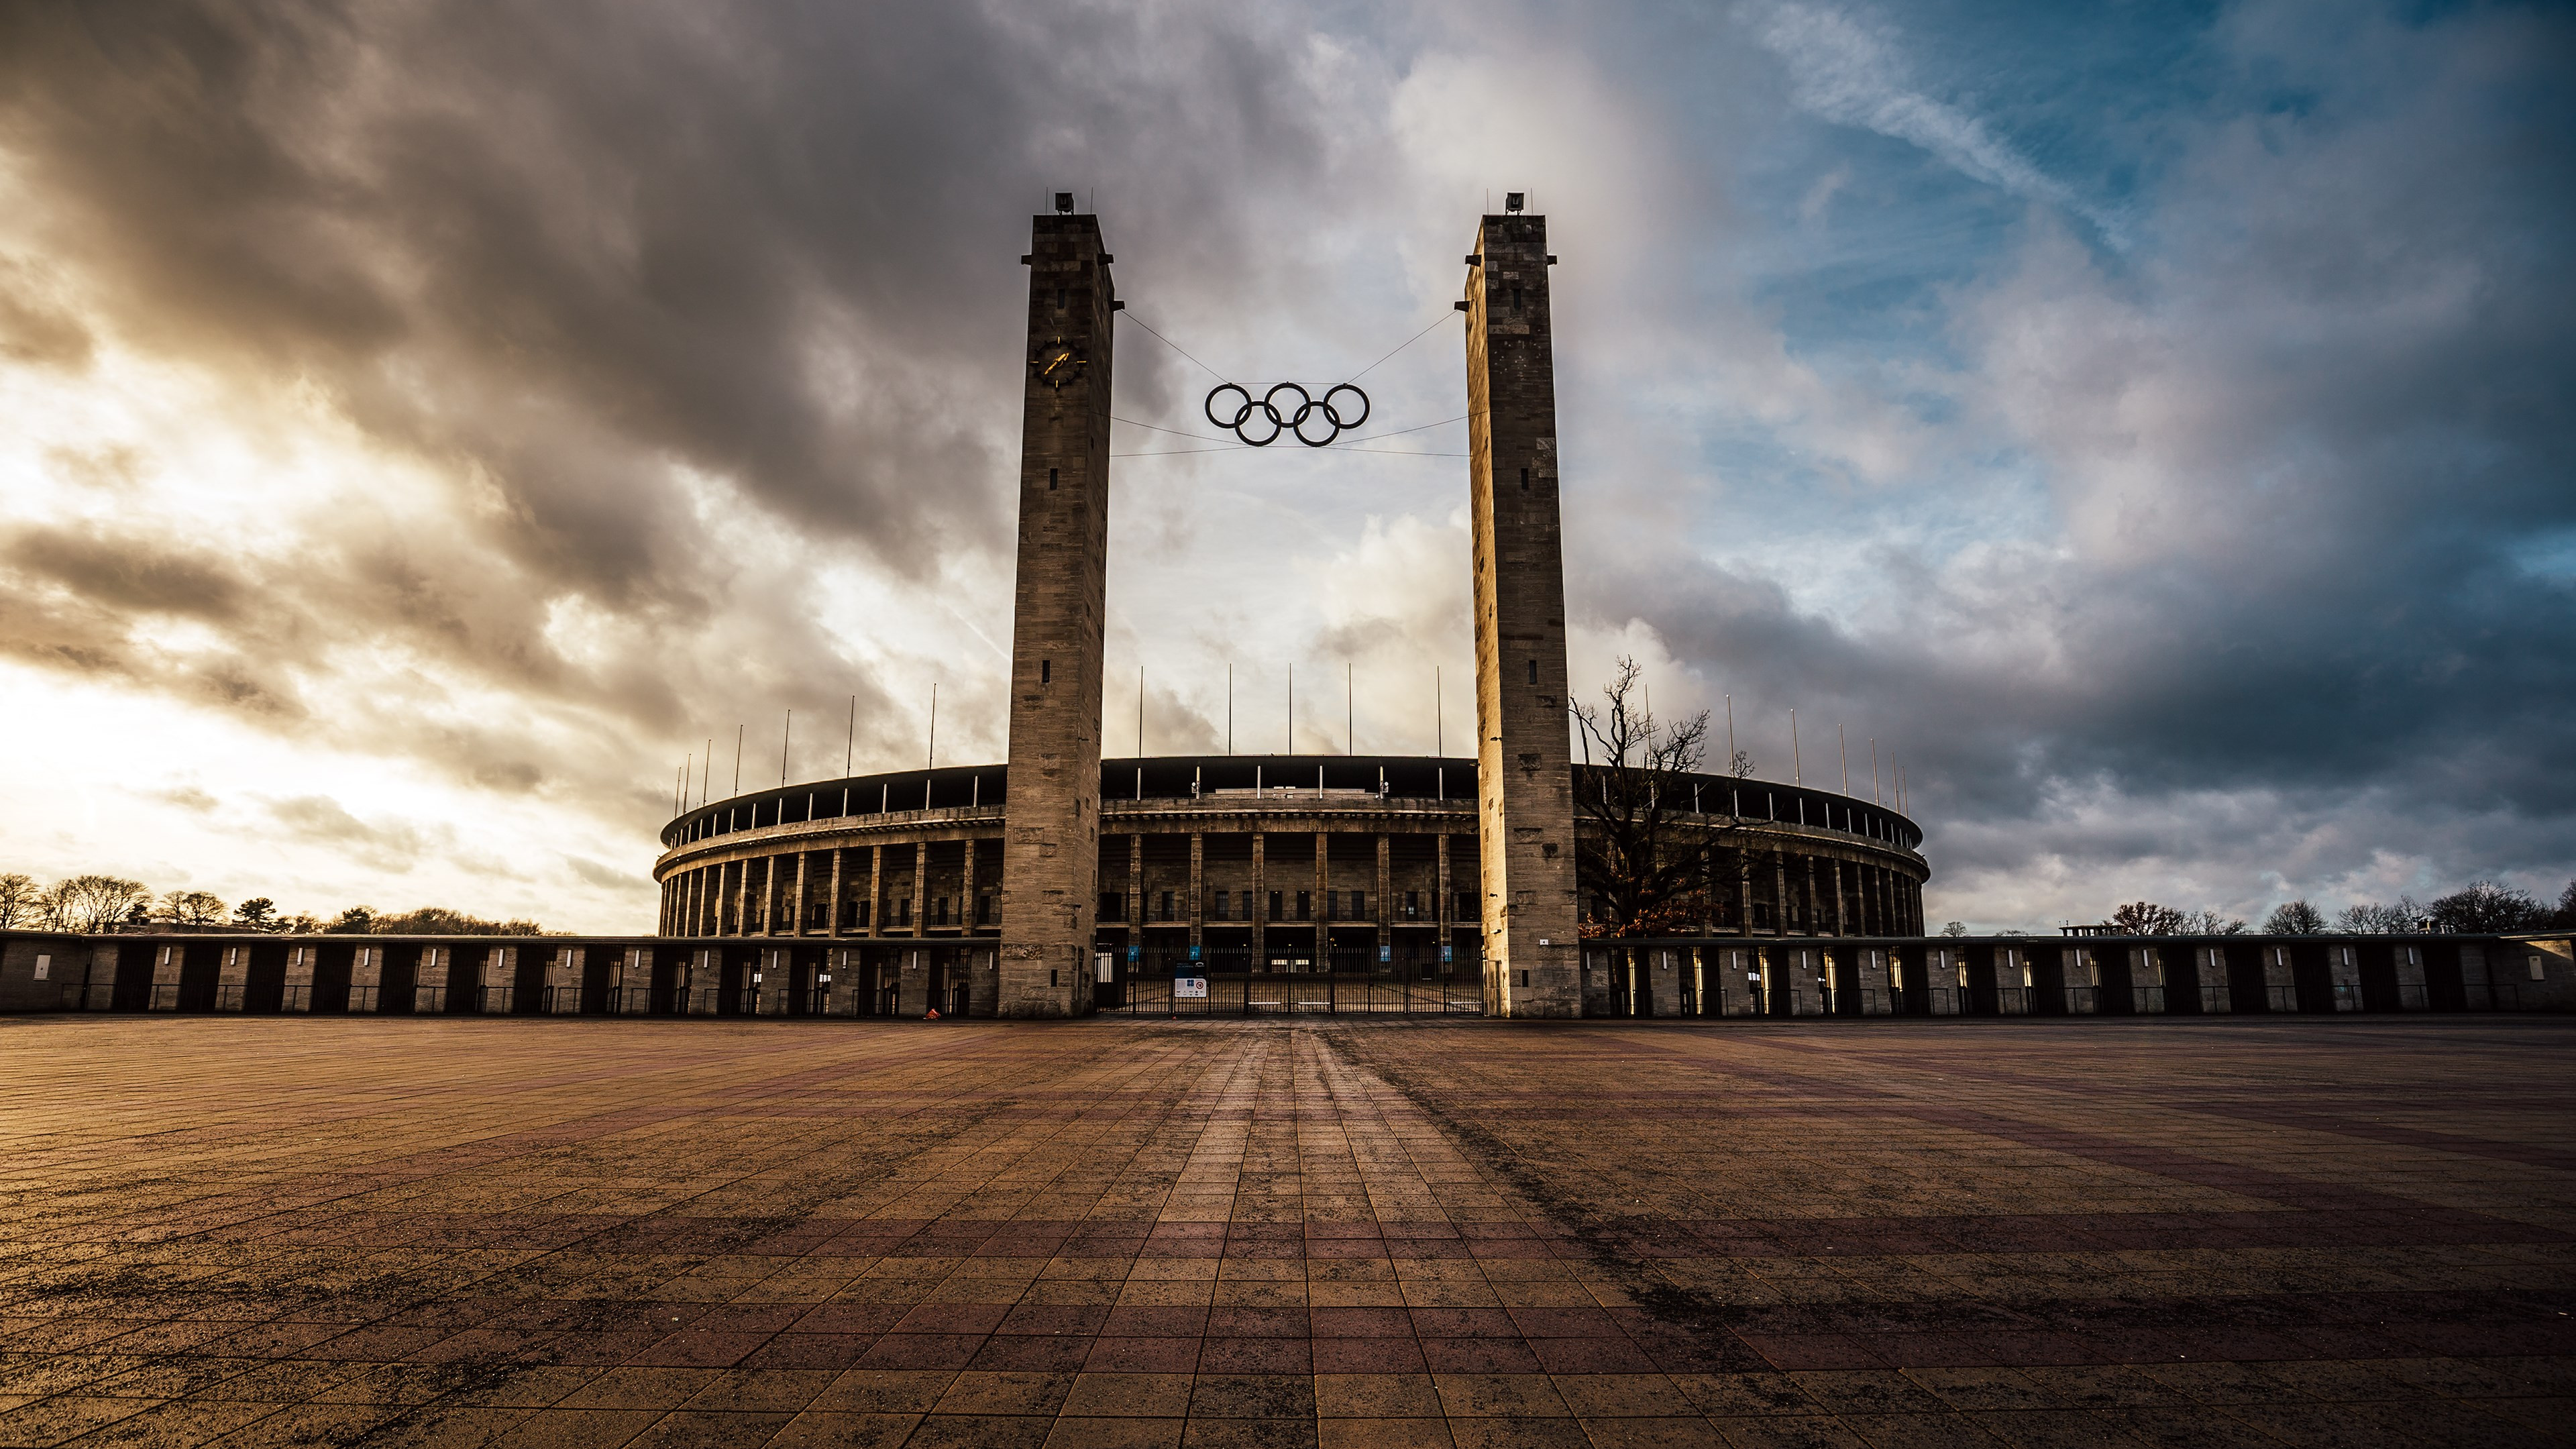 The Olympiastadion from Berlin wallpaper 3840x2160